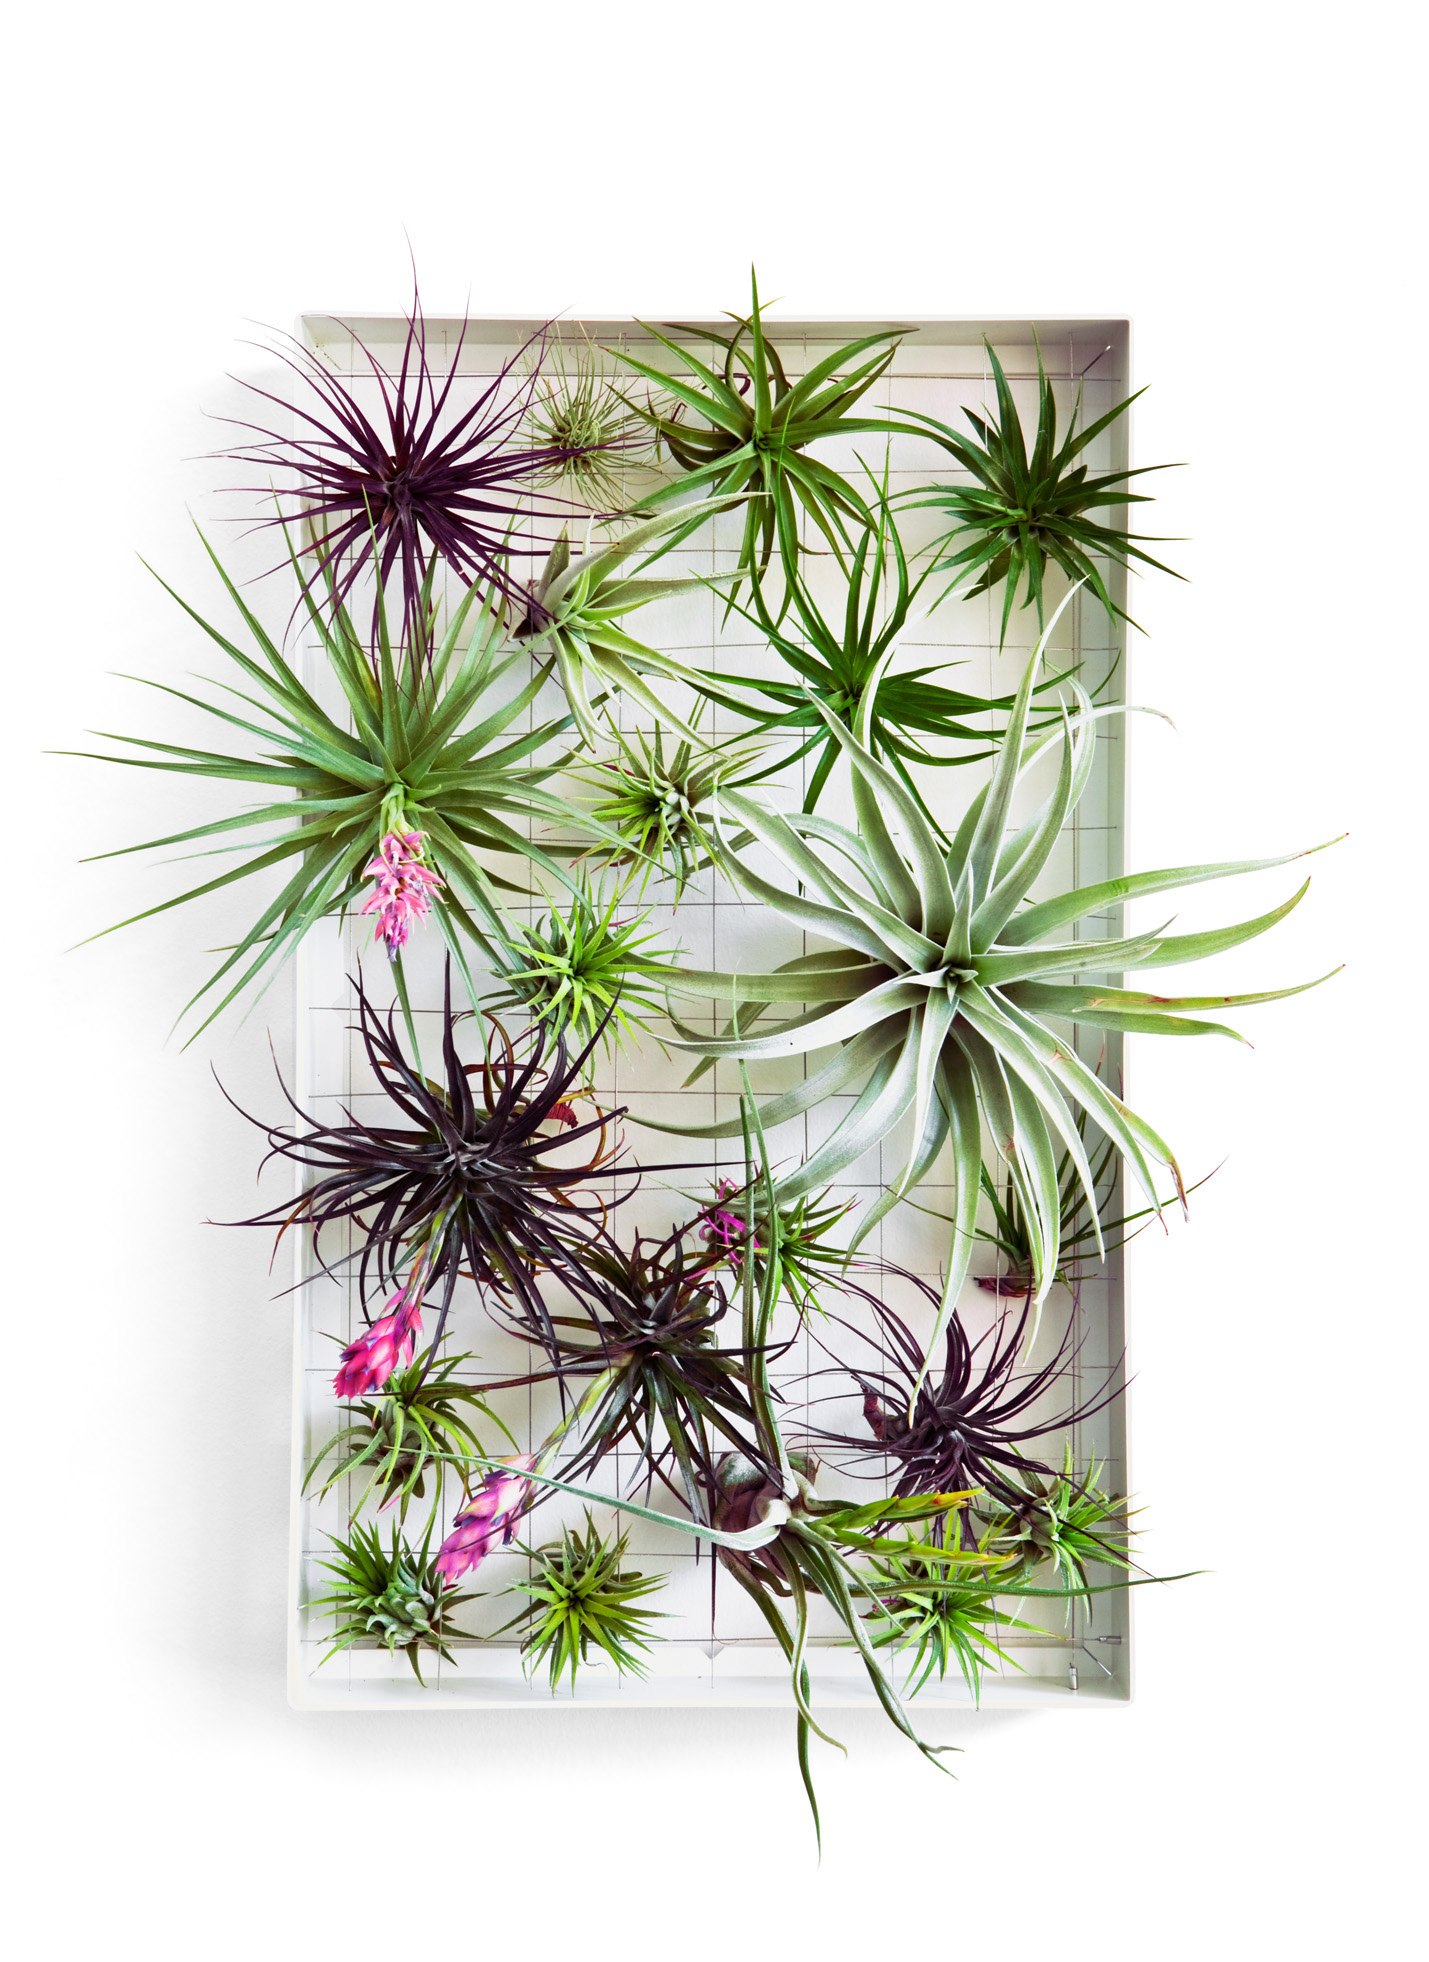 How to Design with Air Plants